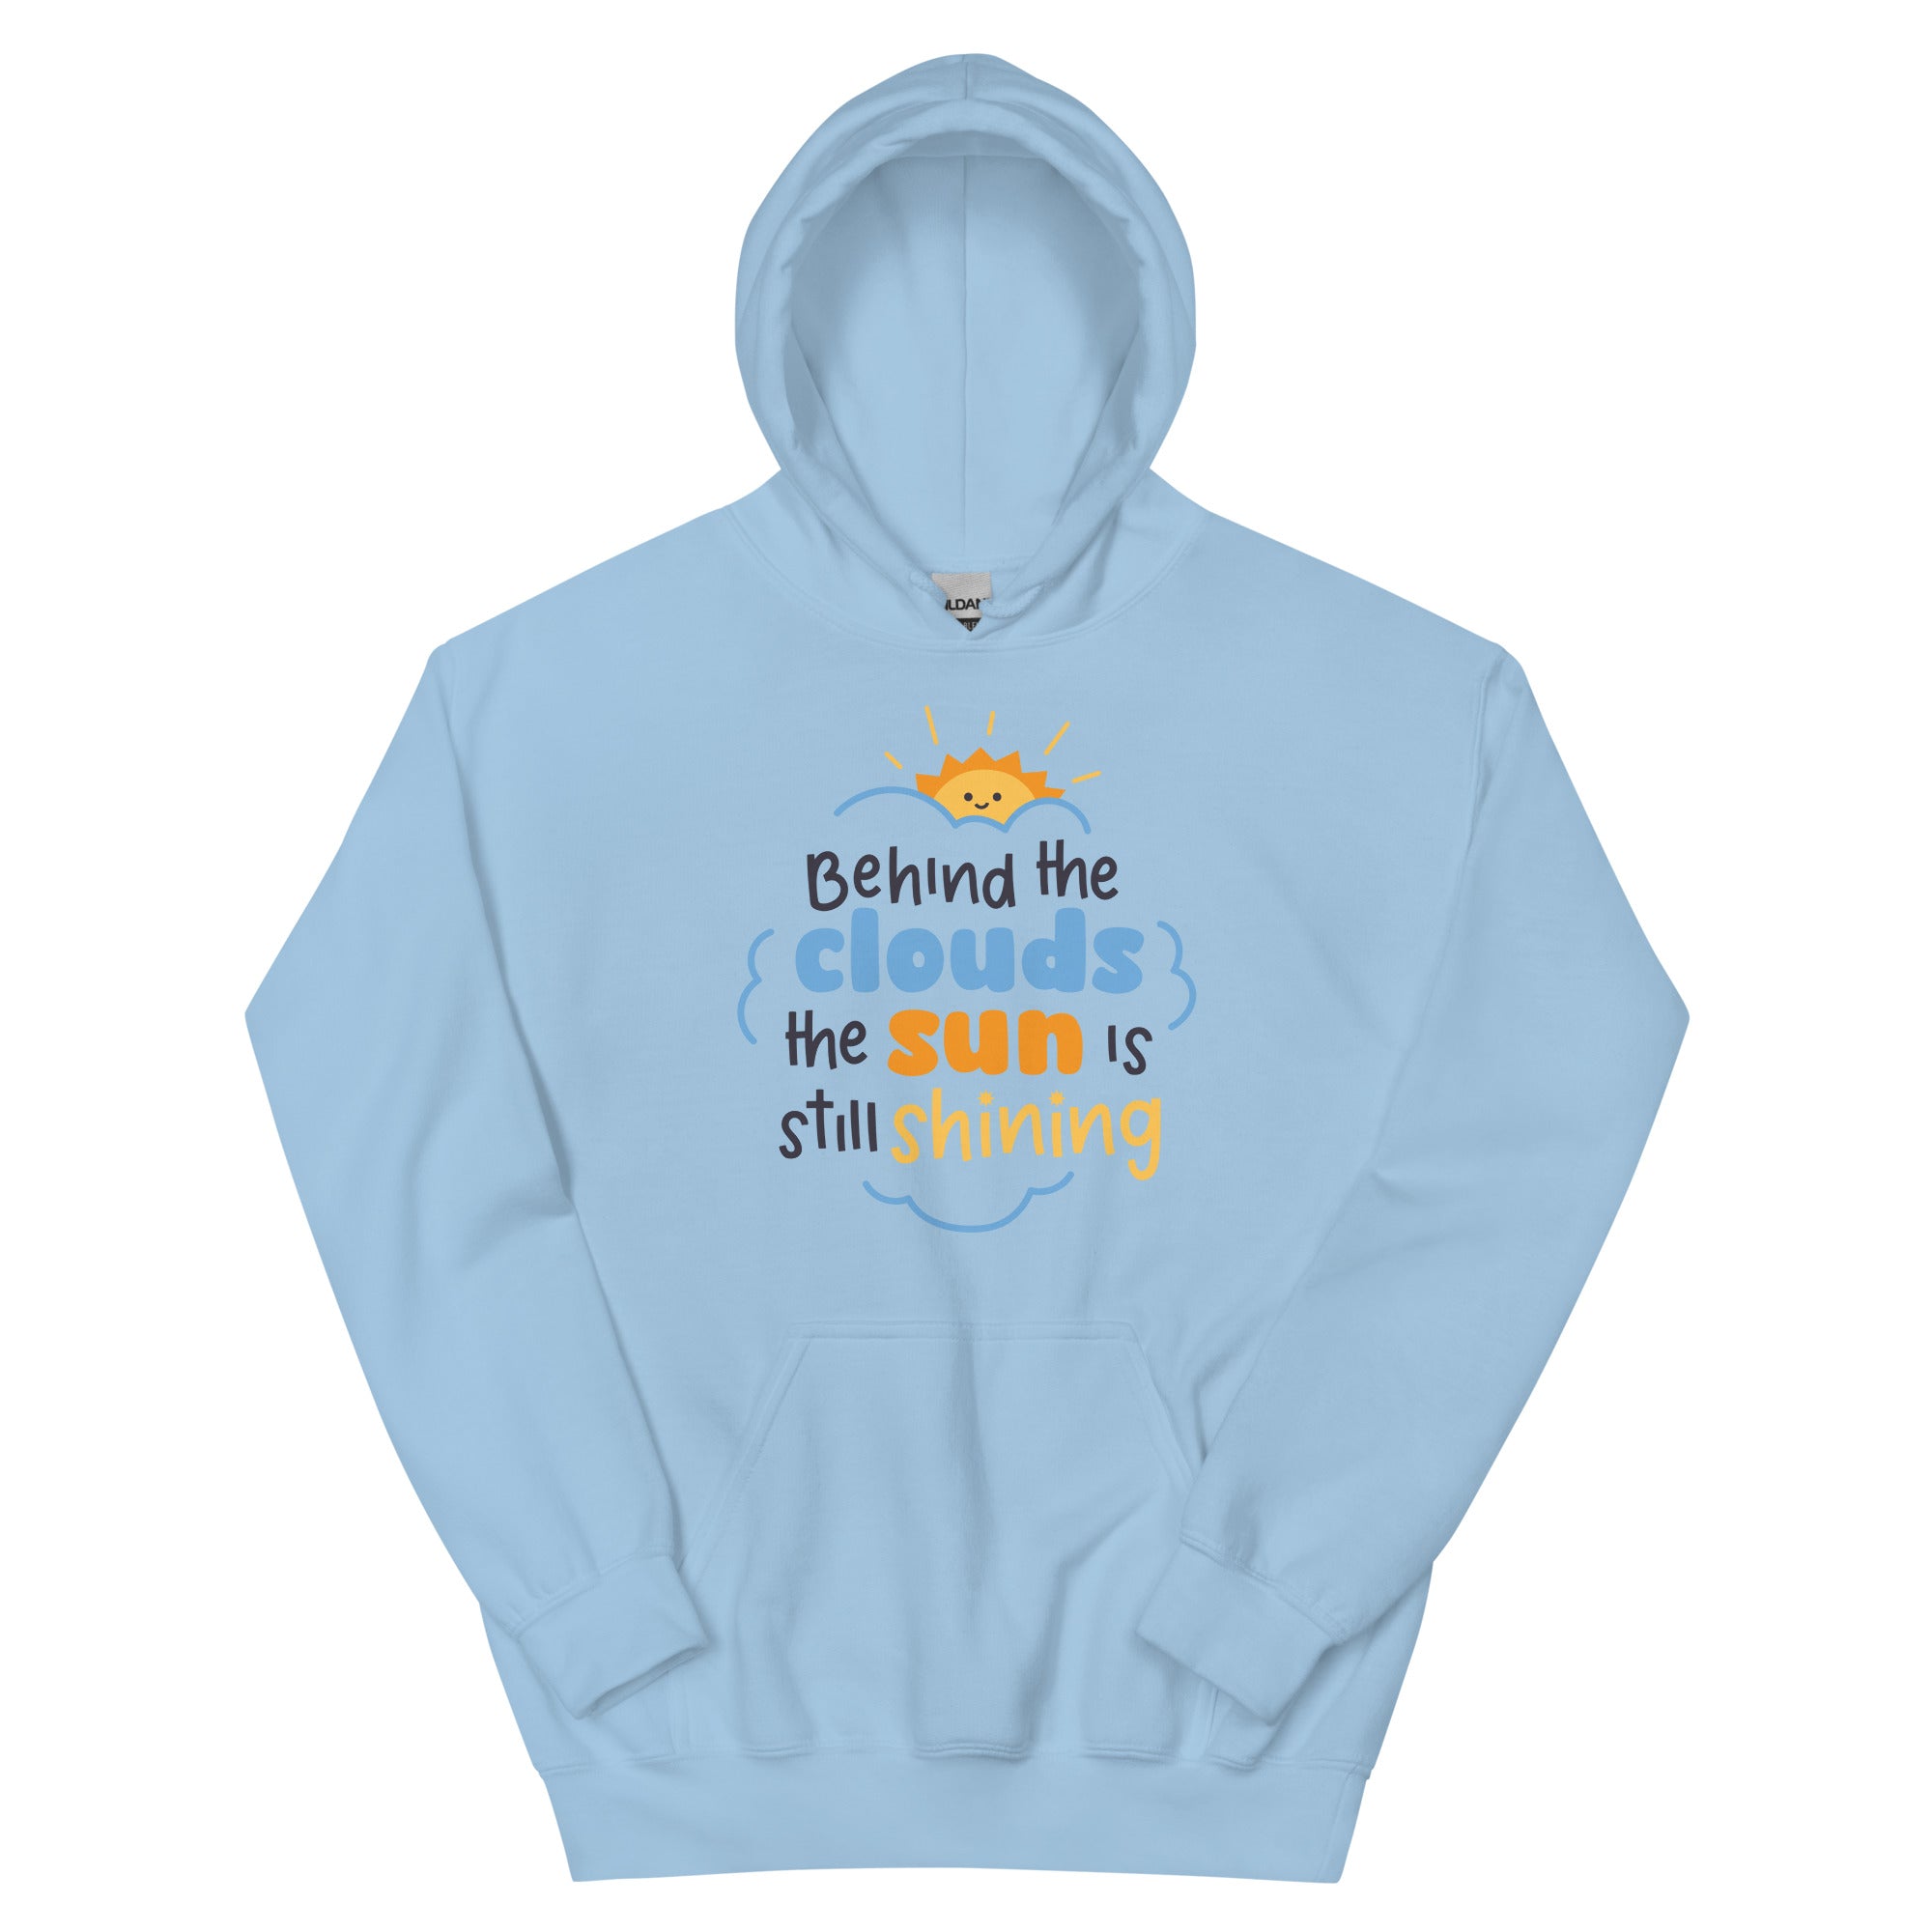 Behind The Clouds The Sun Is Still Shining - Unisex Hoodie